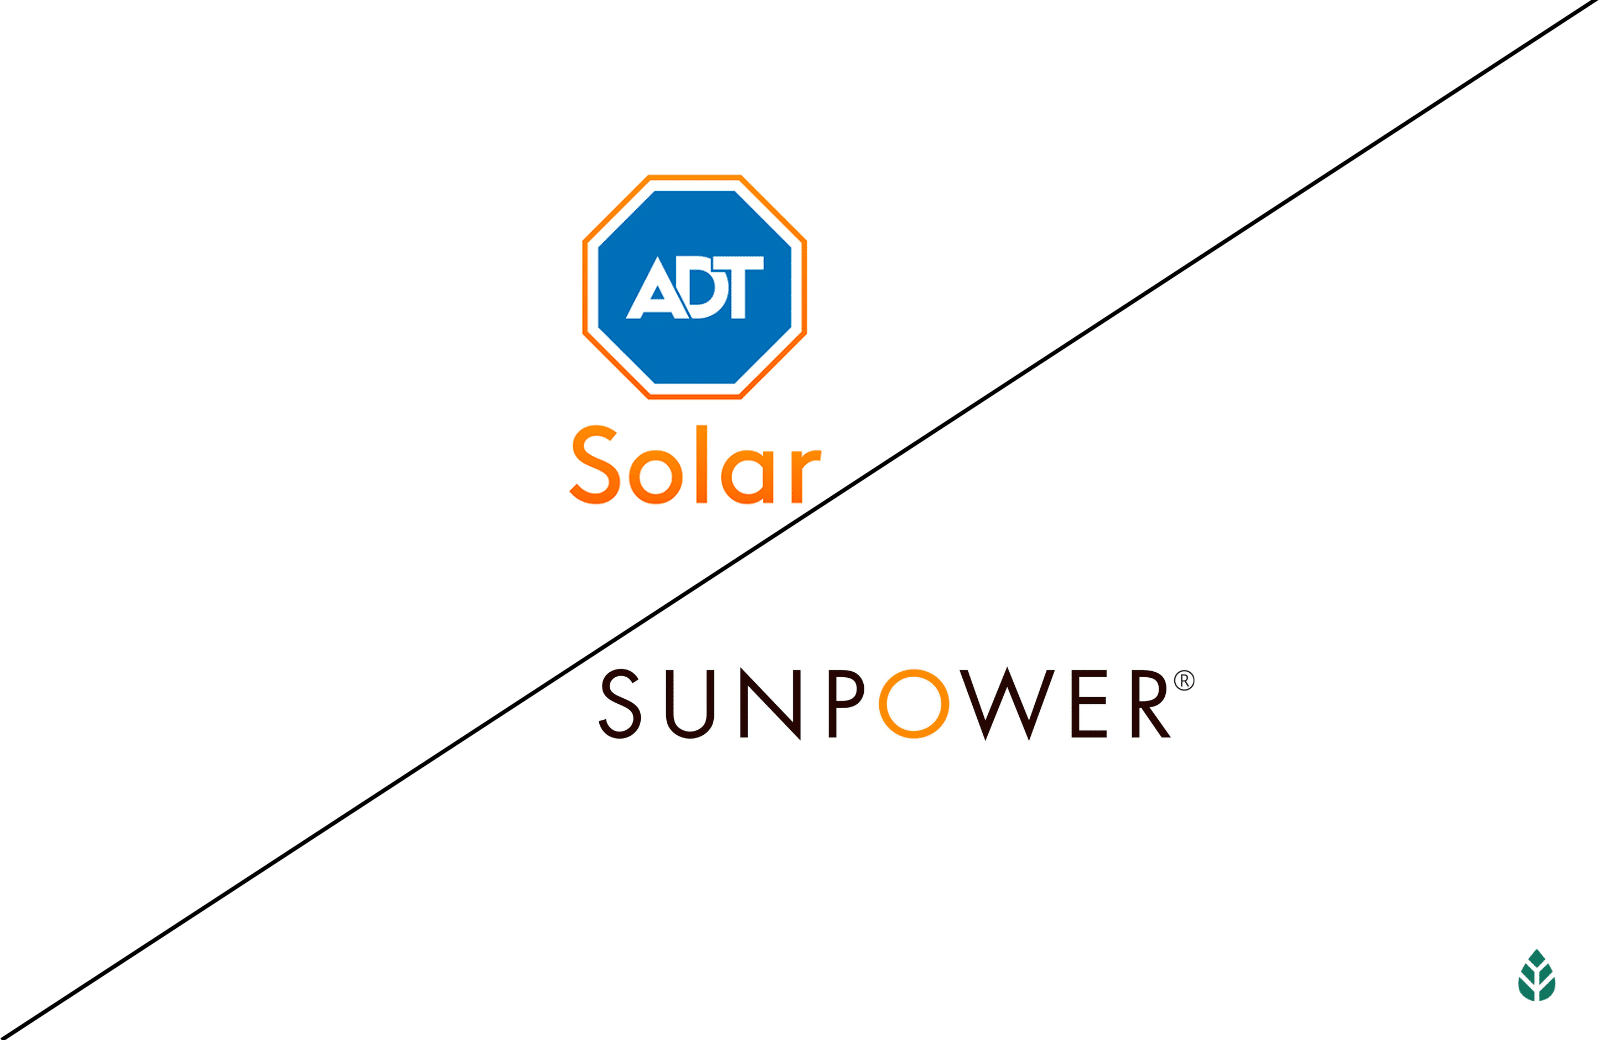 SunPower Vs. ADT Solar: Which Company Is Better? - EcoWatch